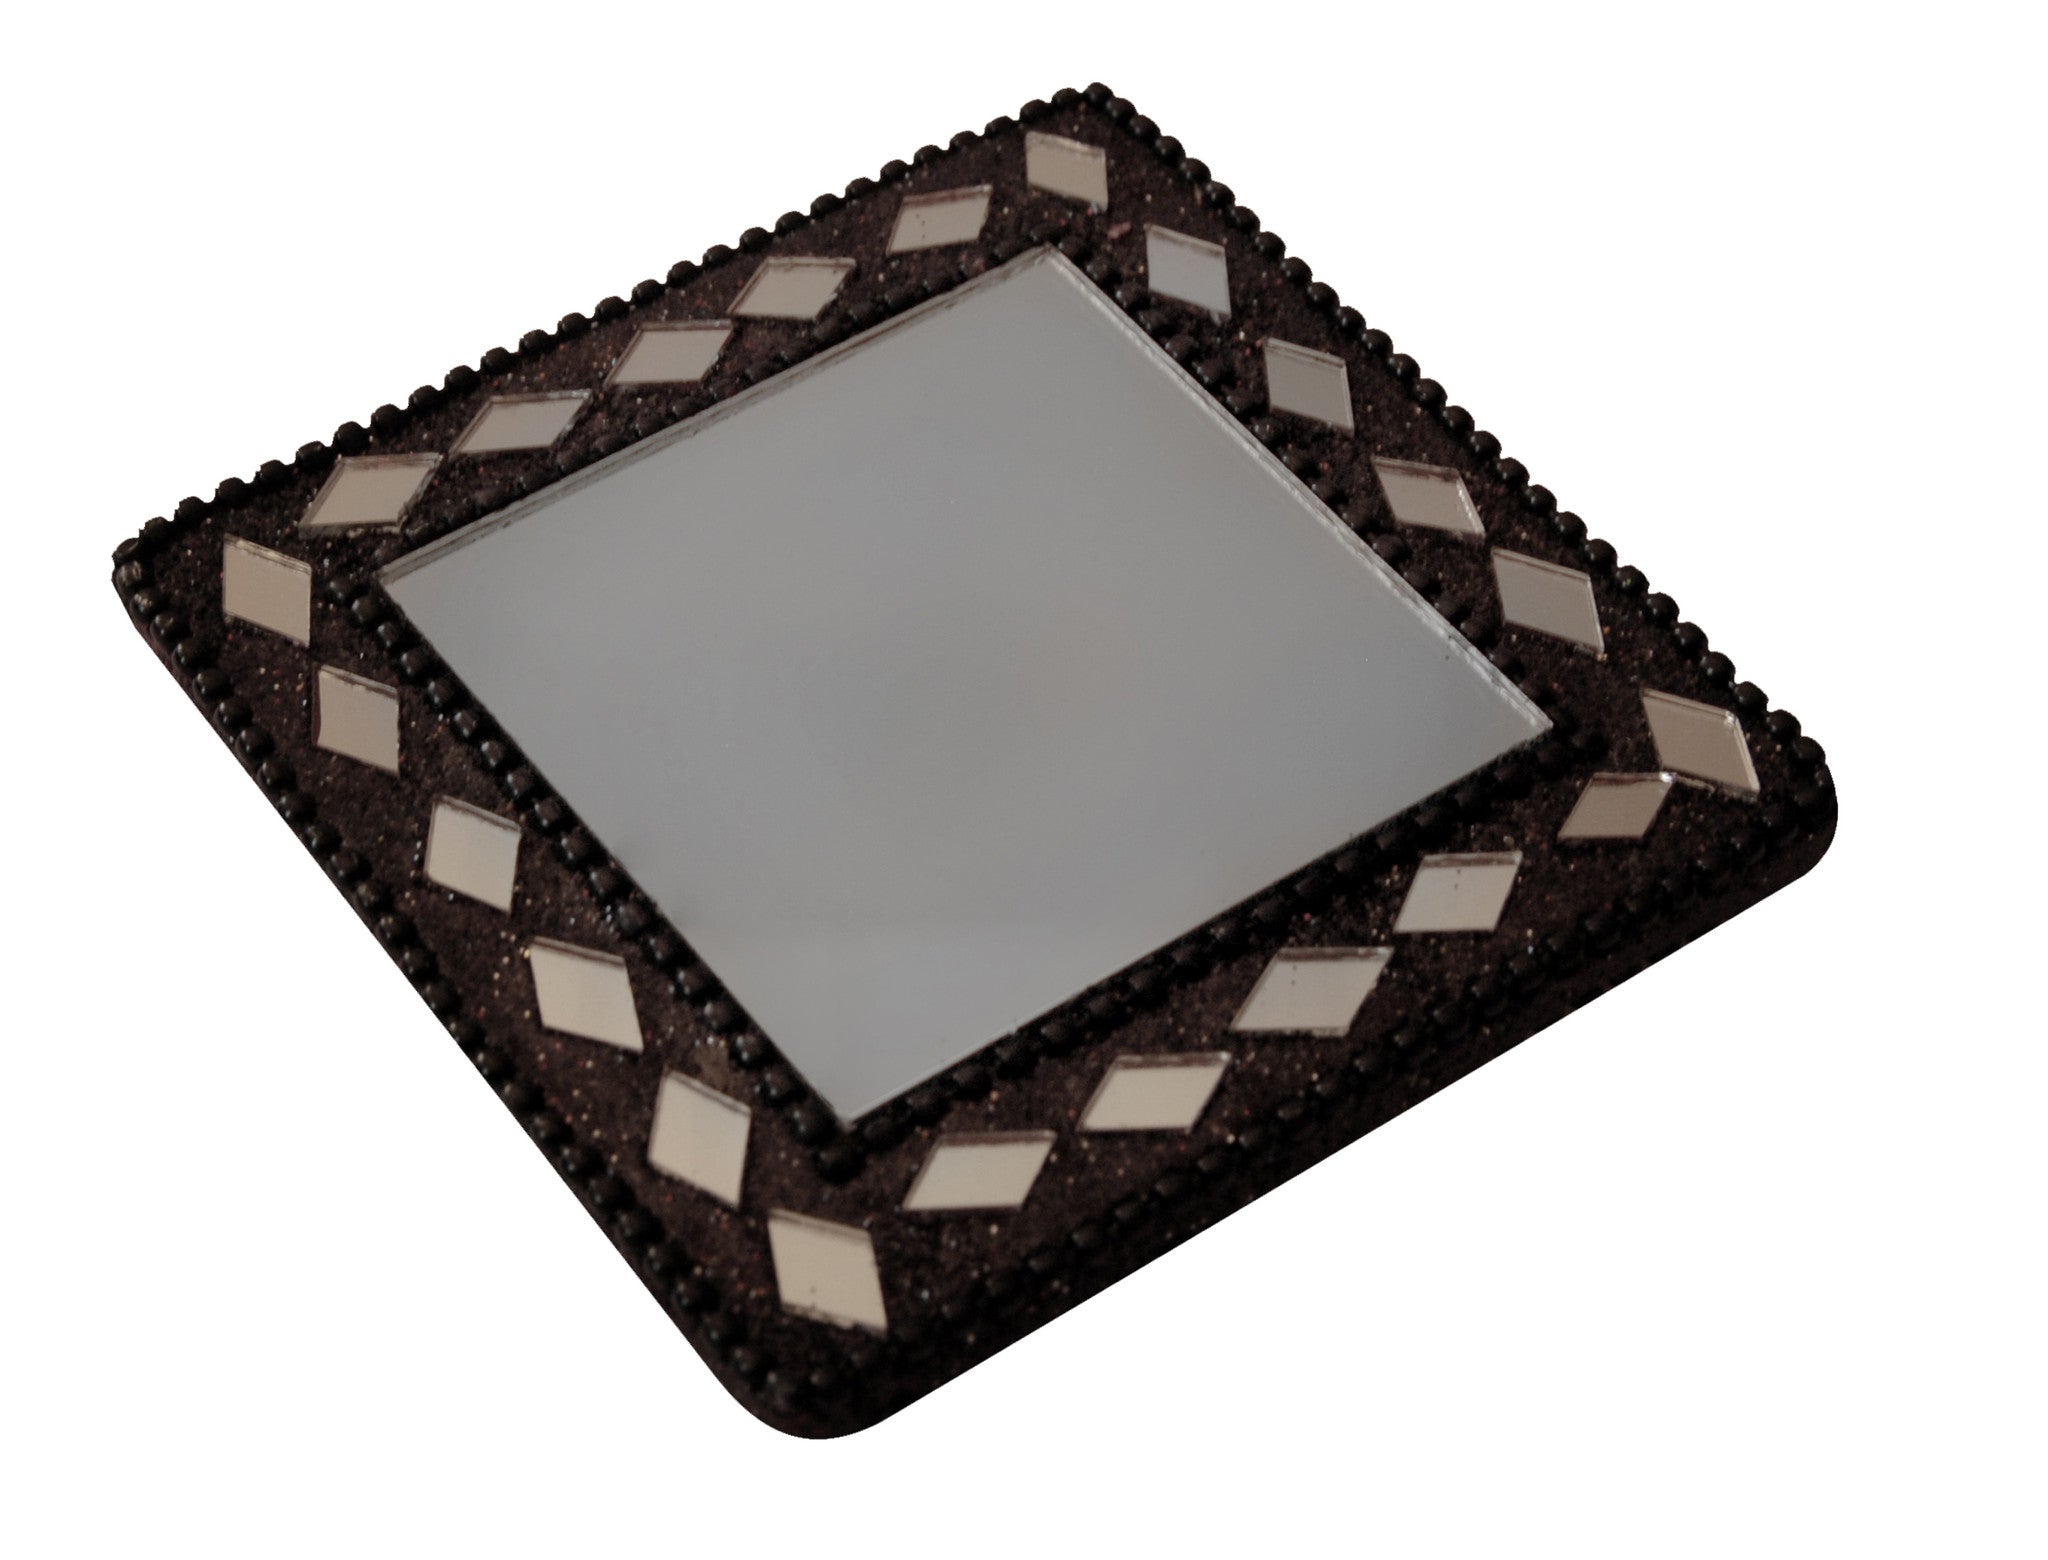 Square mirror with black bling beads